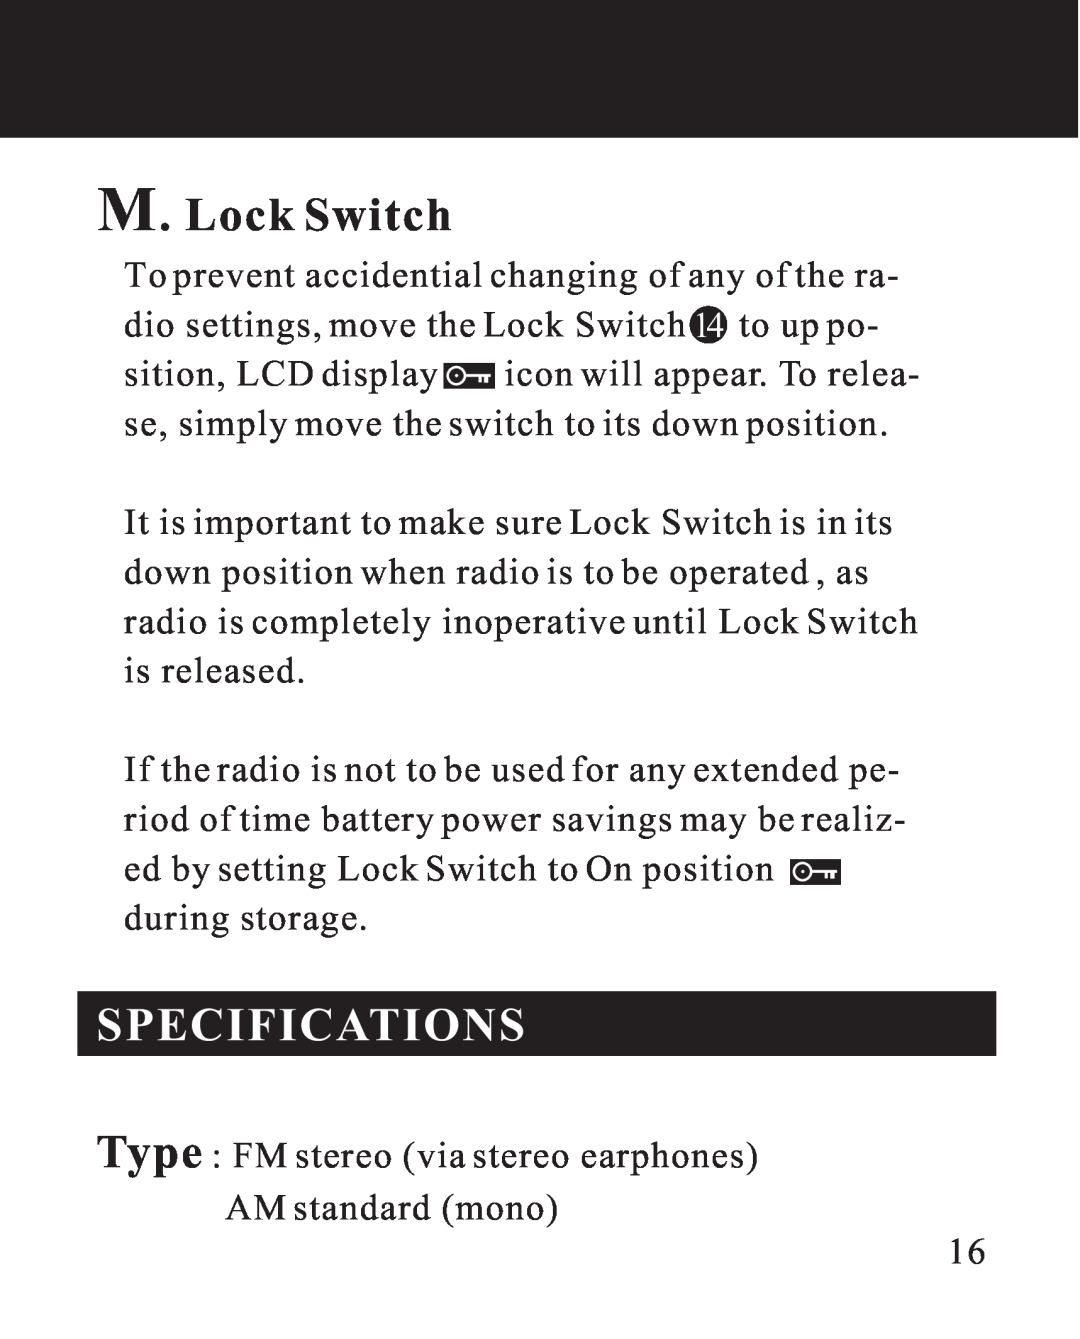 Sangean Electronics DT-110 manual M. Lock Switch, Specifications 